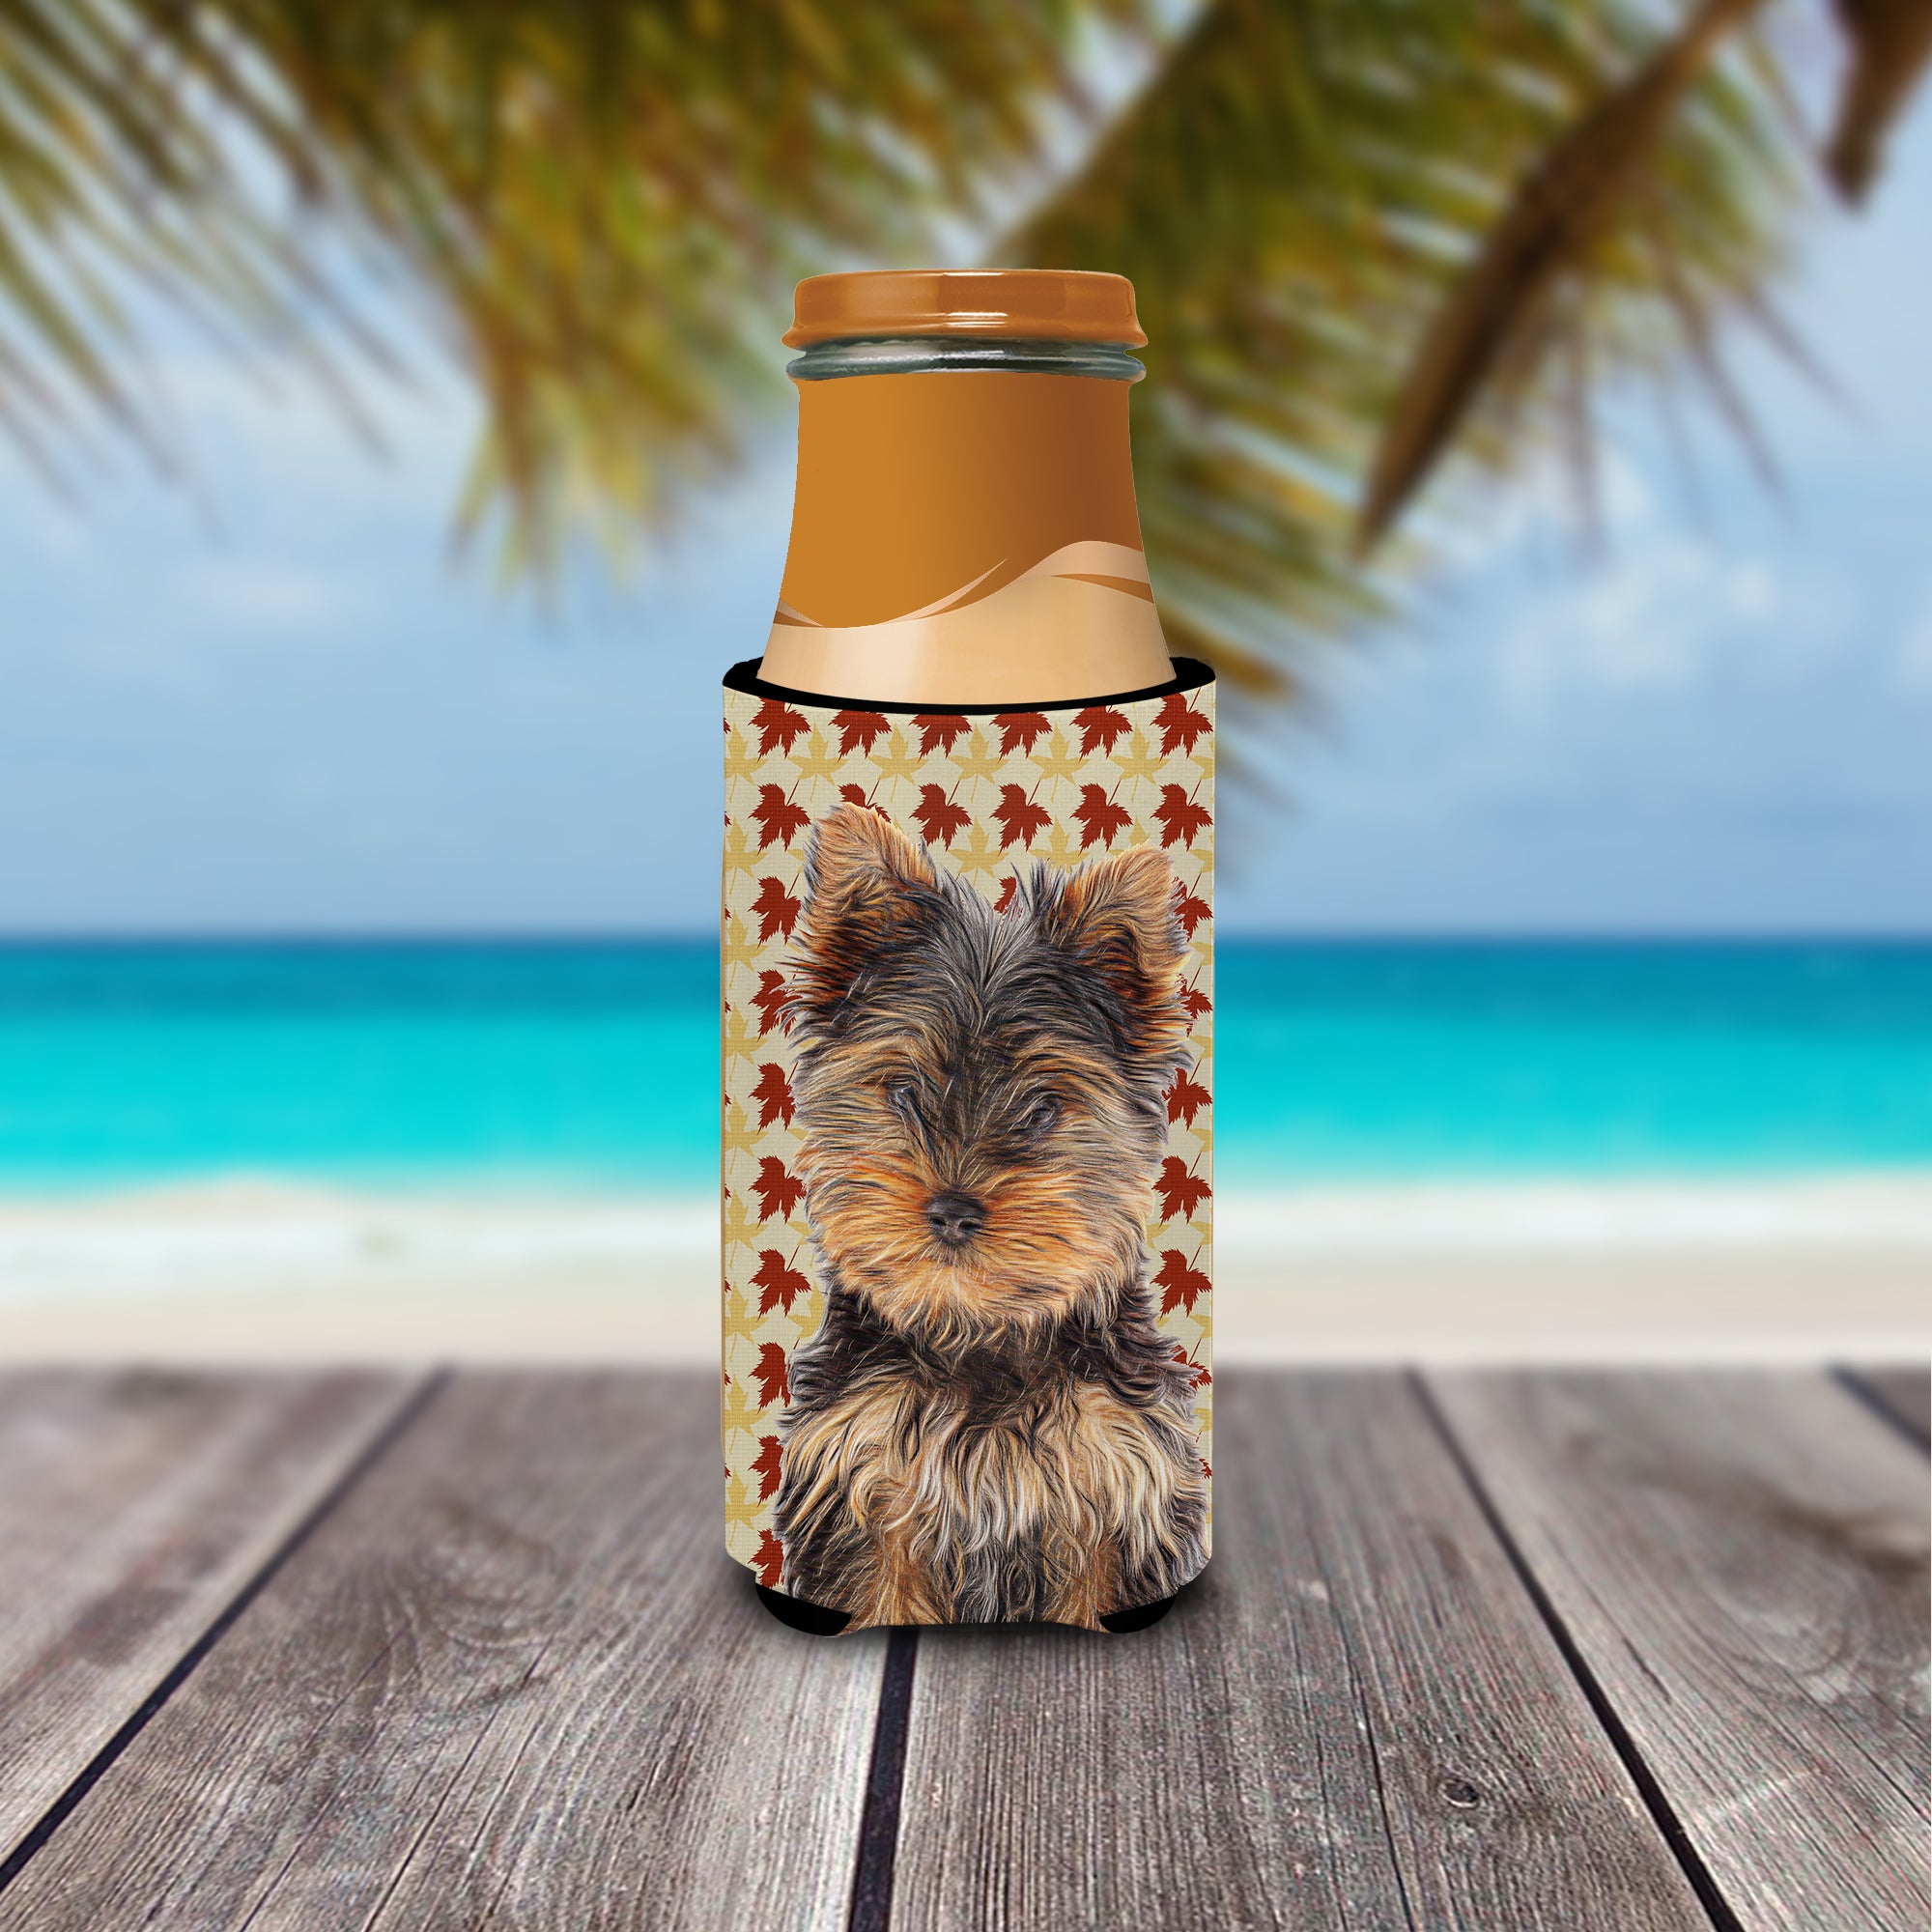 Fall Leaves Yorkie Puppy / Yorkshire Terrier Ultra Beverage Insulators for slim cans KJ1209MUK